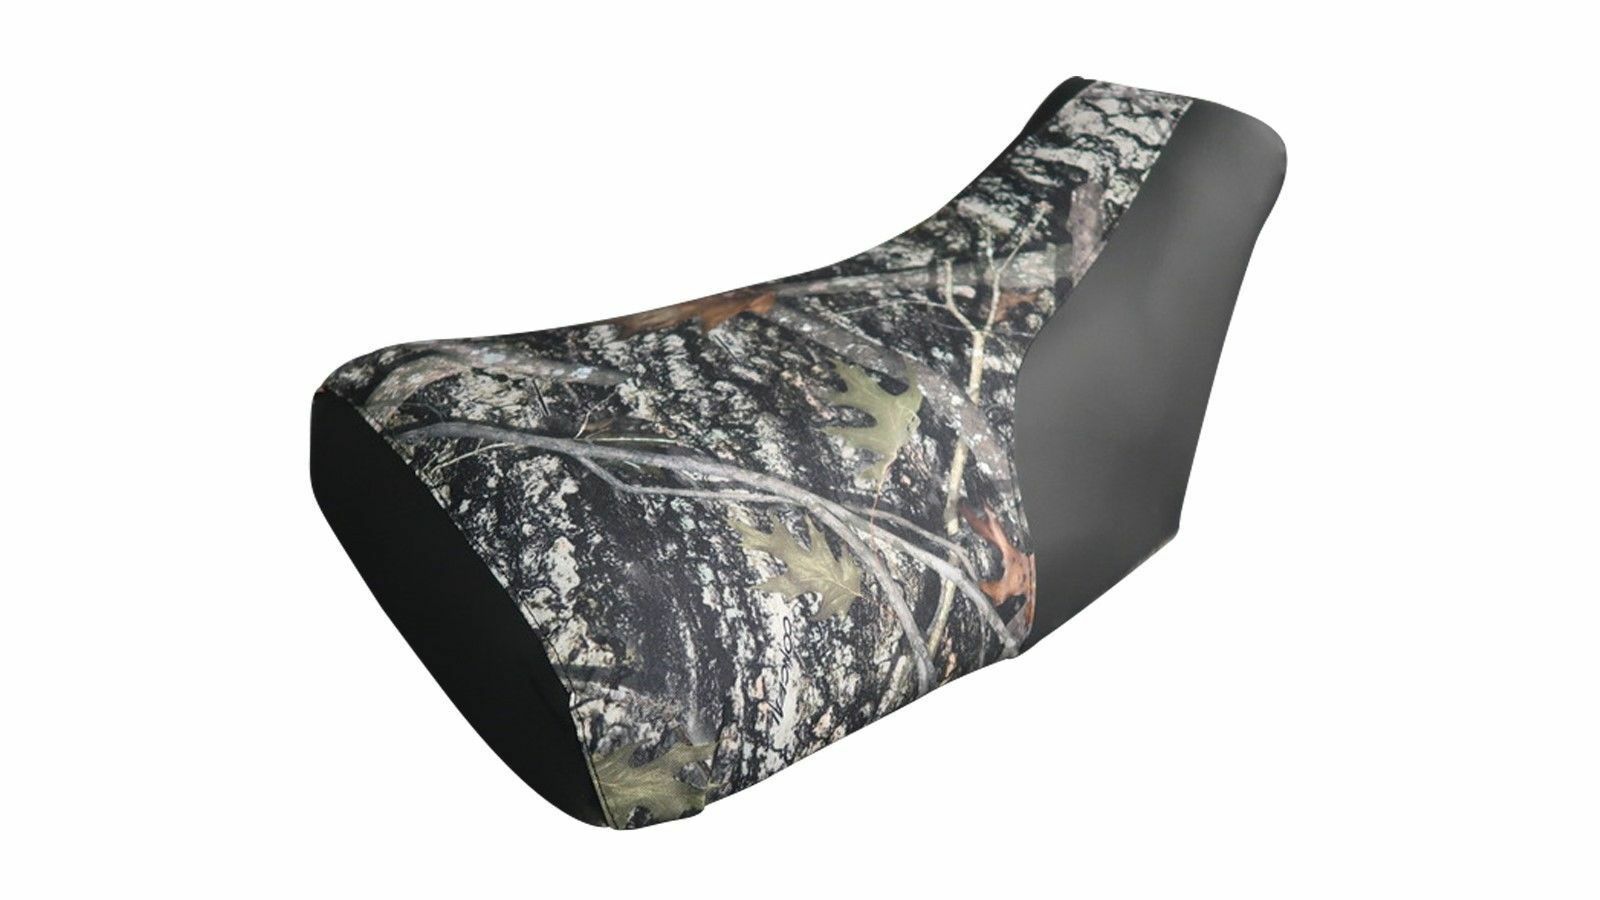 Primary image for Fits Honda Rancher Seat Cover 2000 To 2003 Camo Top Black Side ATV Seat Cover #G